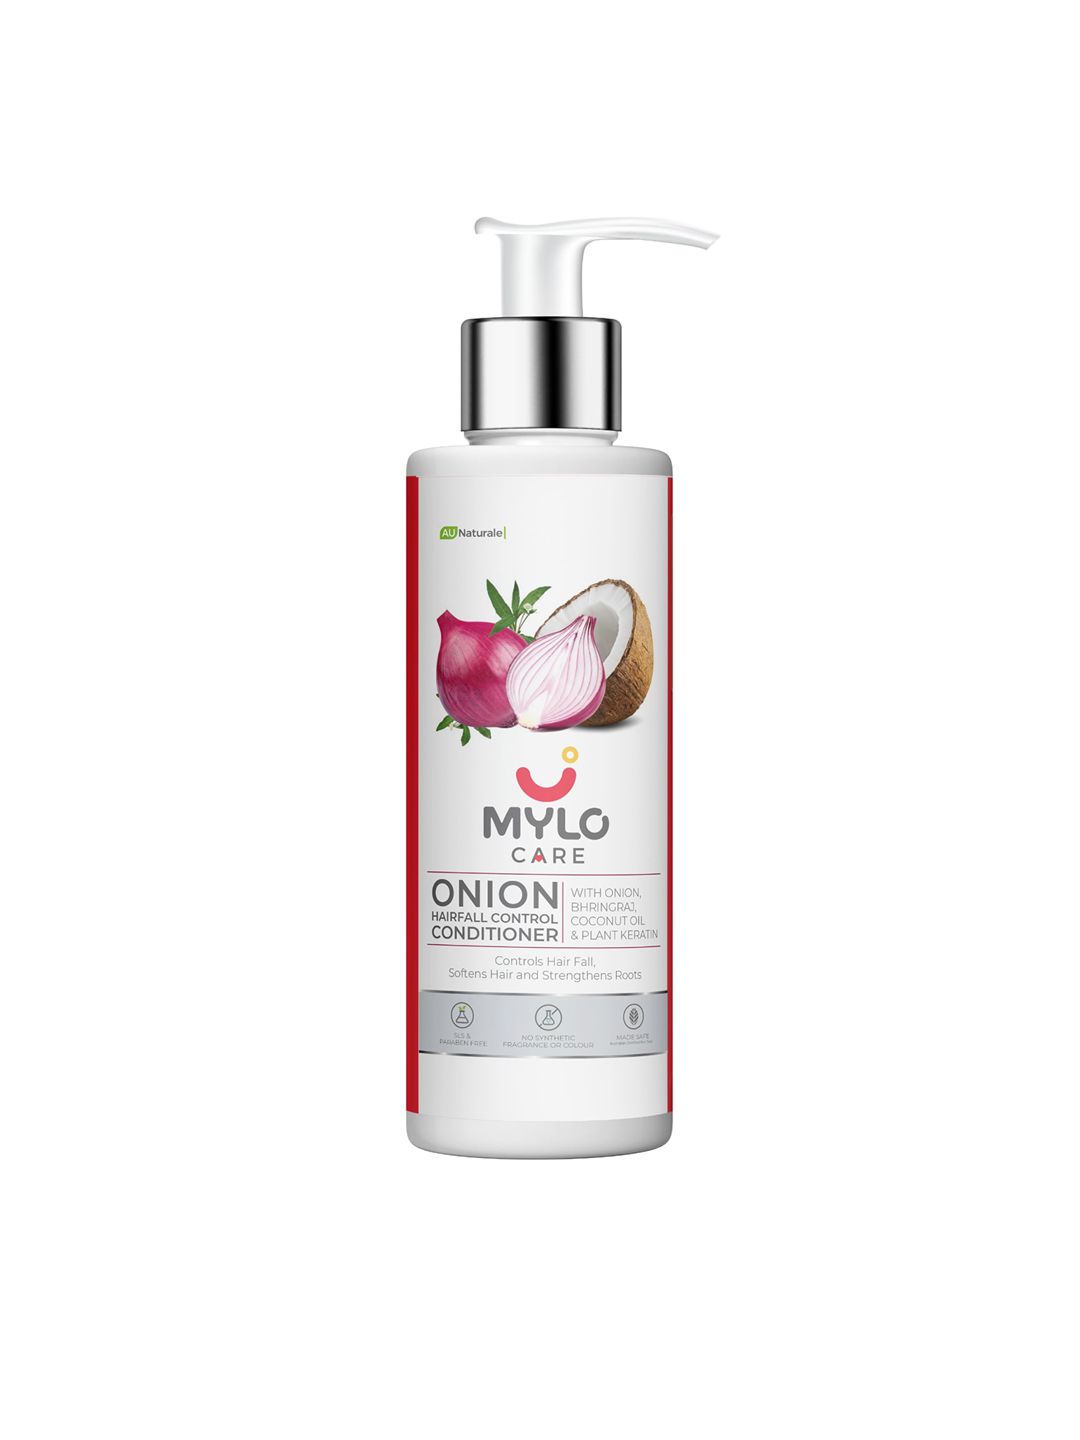 MYLO CARE Onion Anti Hair Fall Conditioner- 200ml Price in India